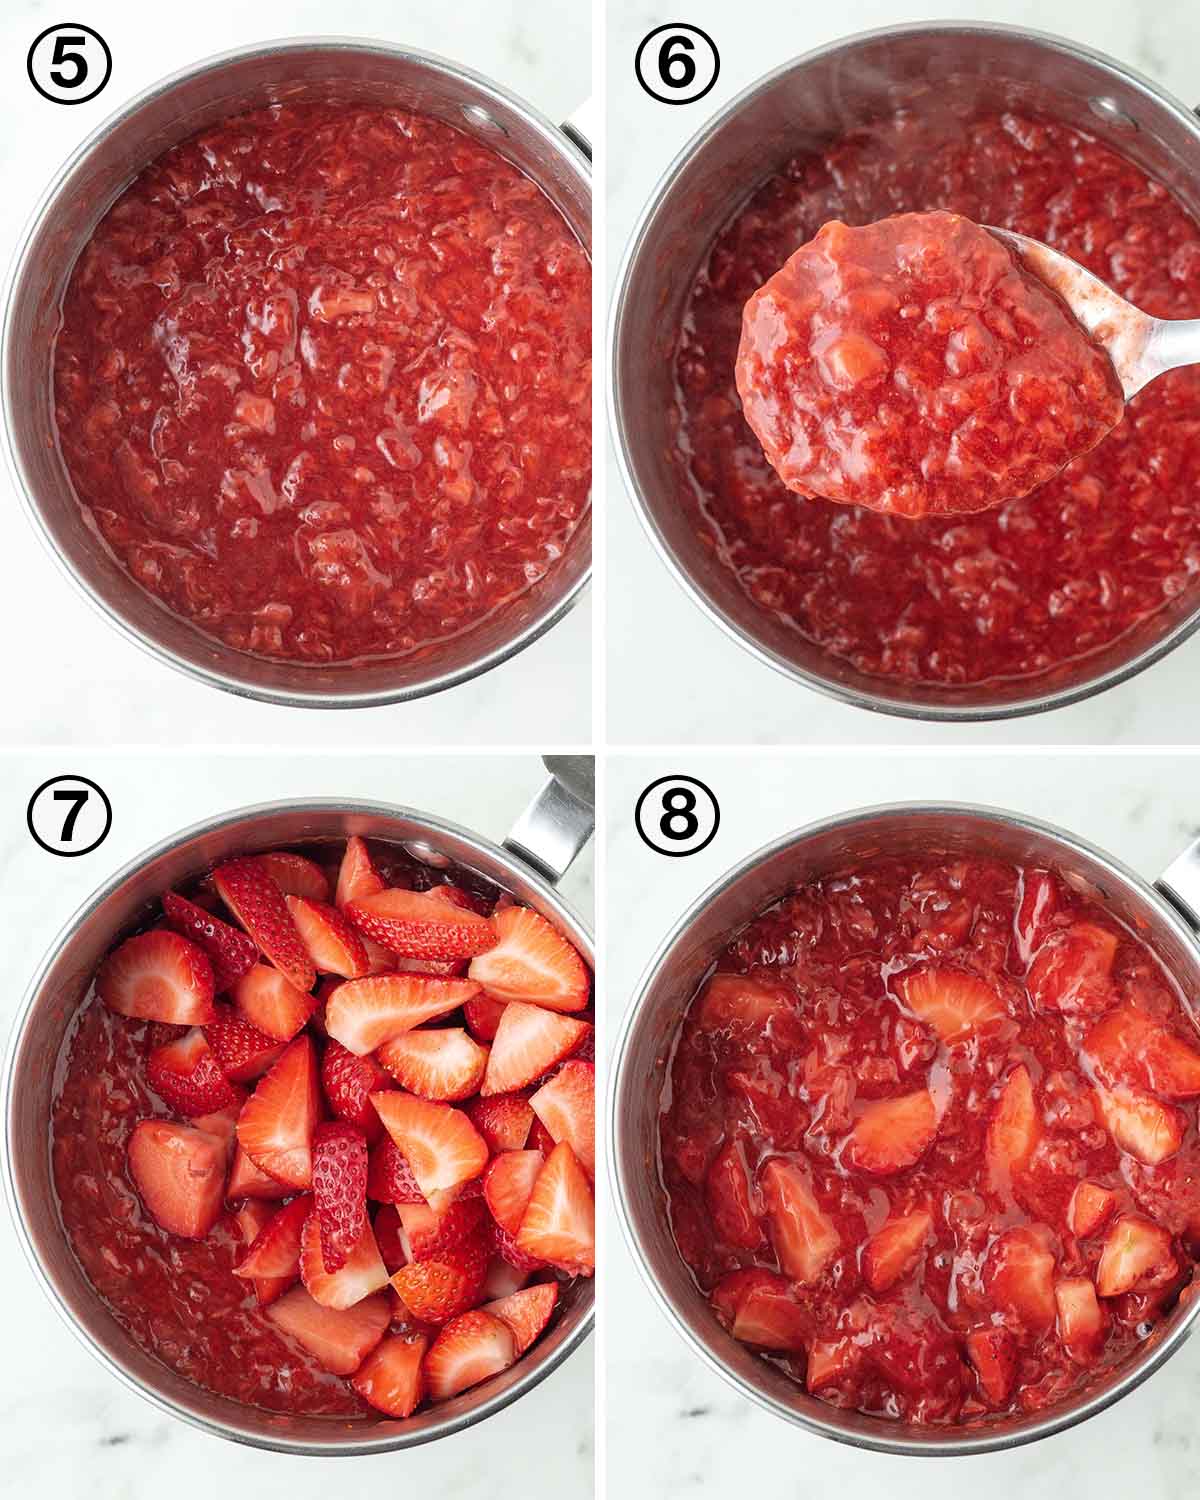 A collage of four images showing the second sequence of steps needed to make a vegan strawberry pie.